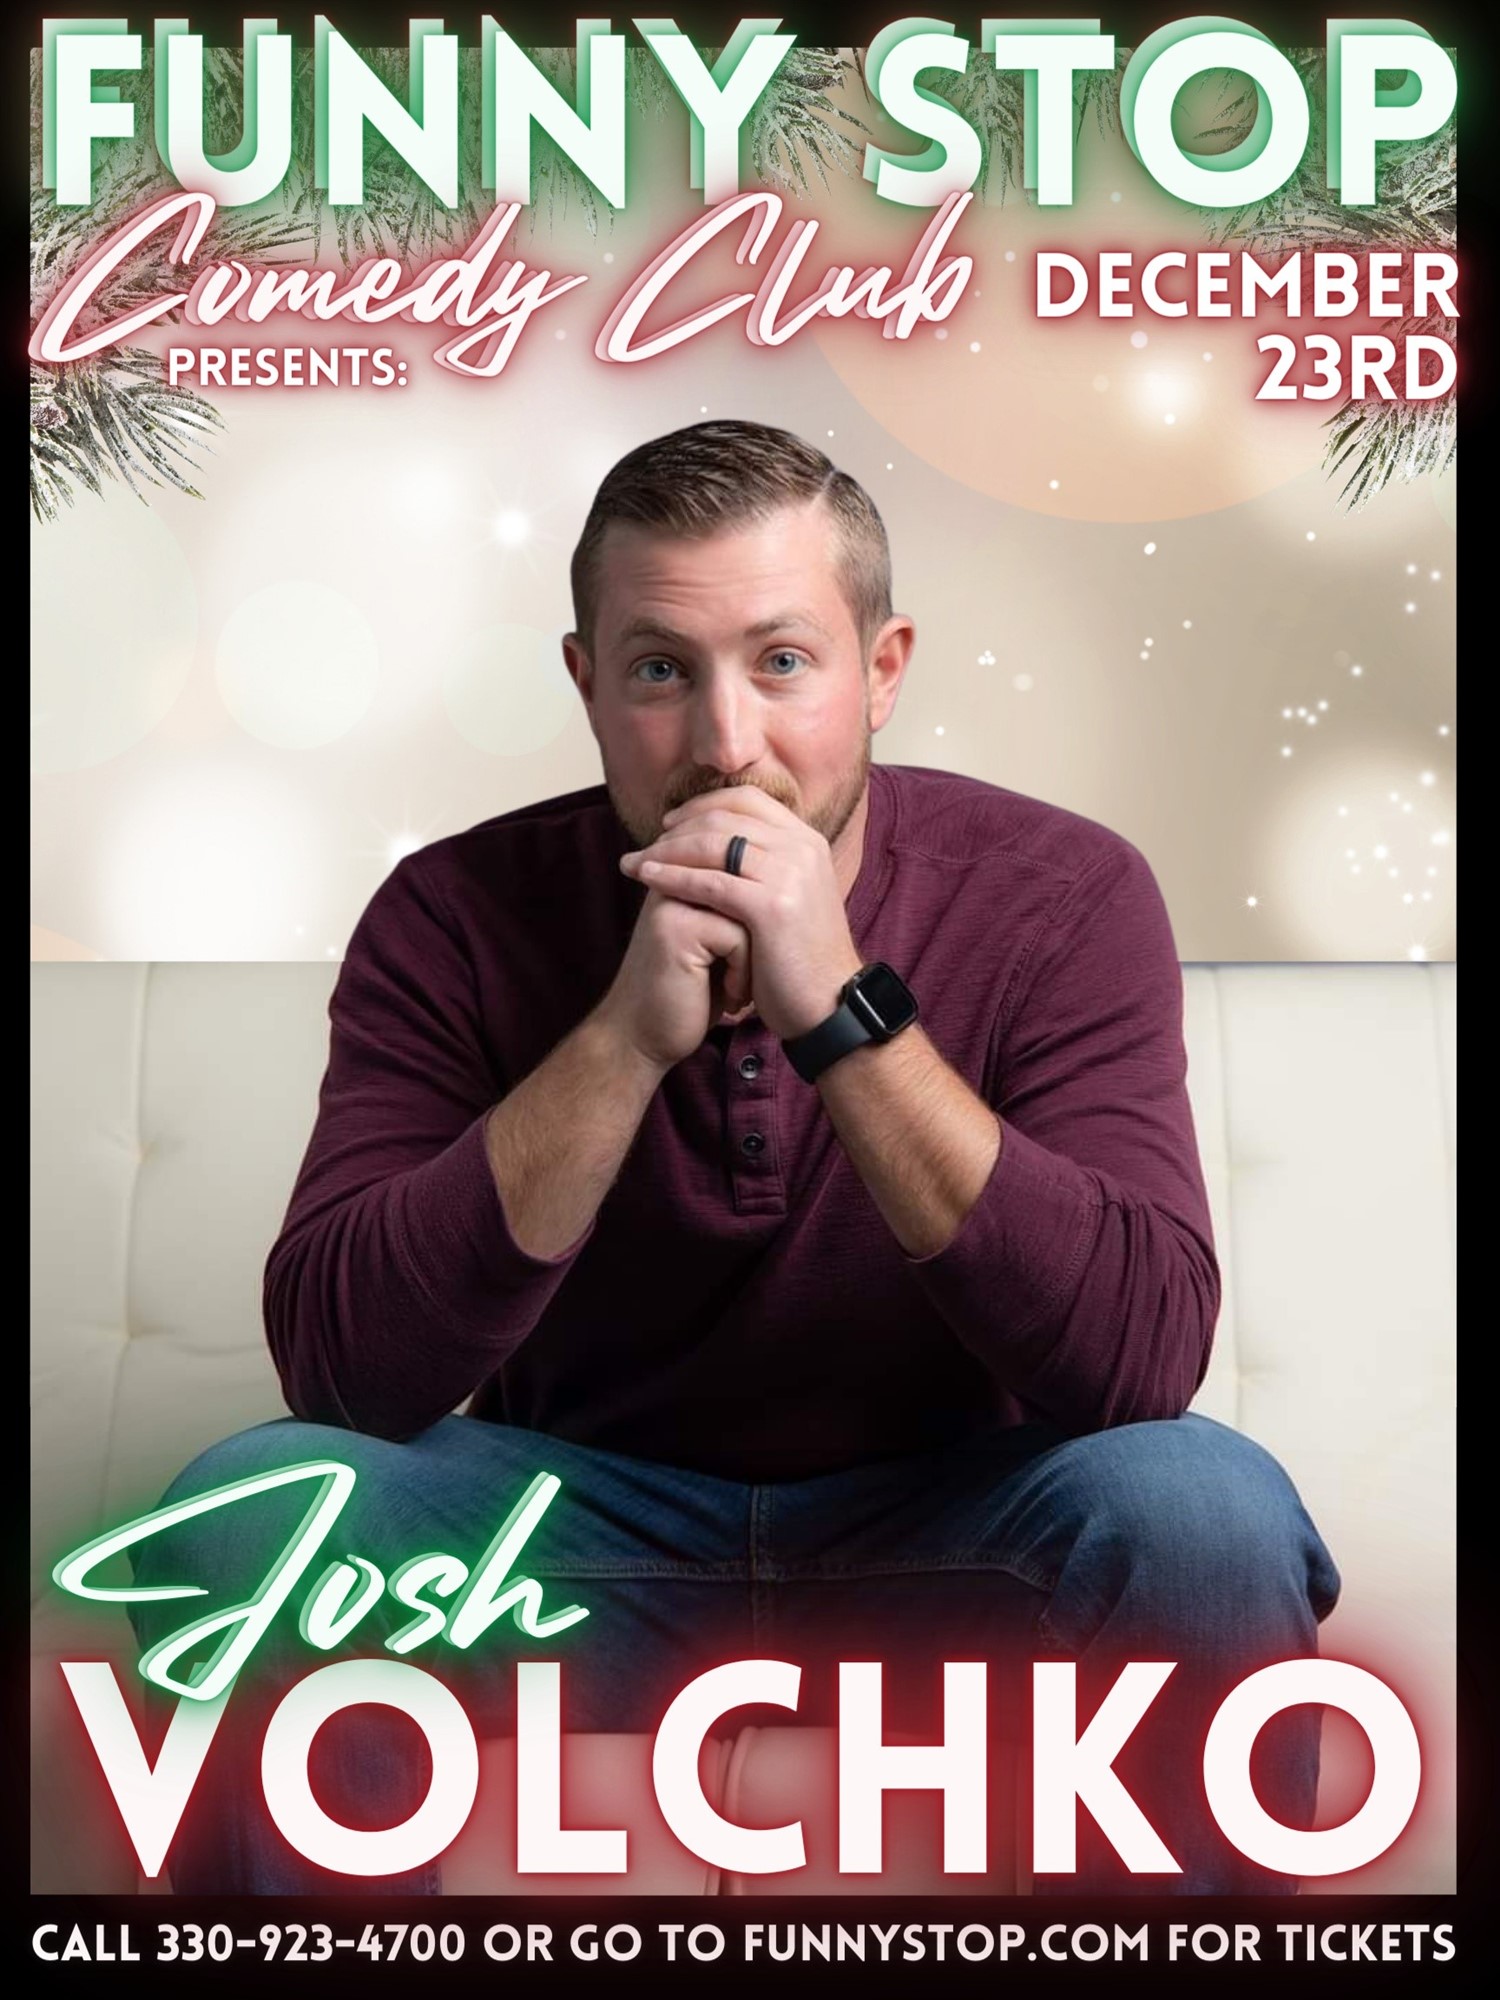 Josh Volchko 9:20pm Show Funny Stop Comedy Club on Dec 23, 21:20@Funny Stop Comedy Club - Buy tickets and Get information on Funny Stop funnystop.online